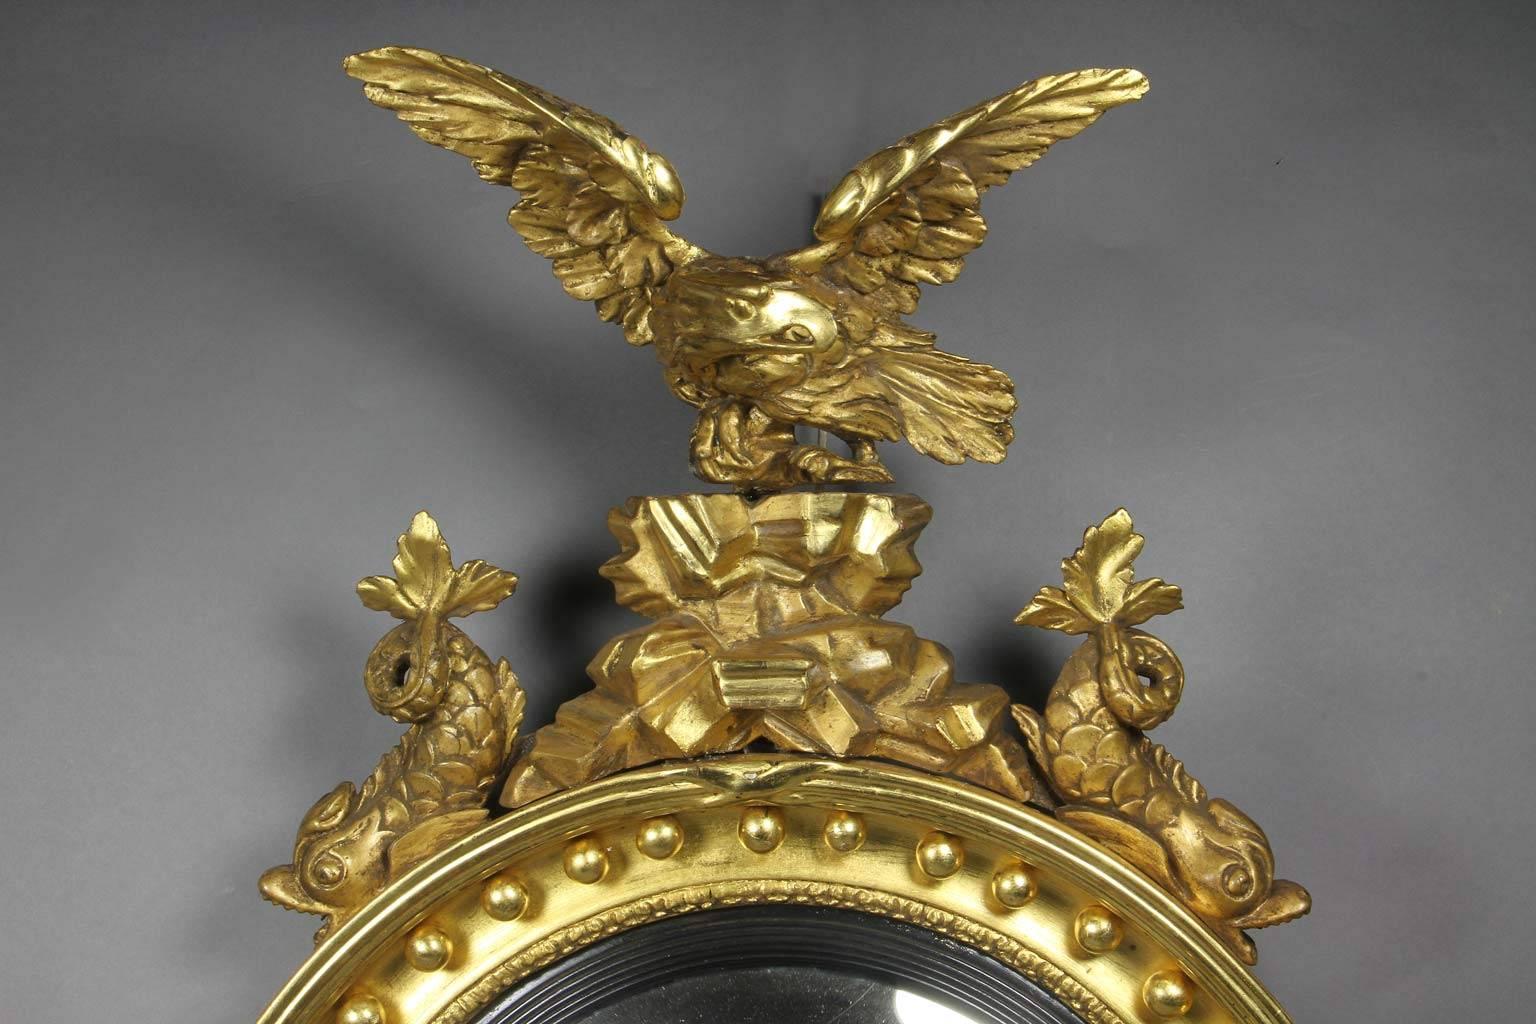 With eagle on rockwork flanked by dolphins over a convex glass plate set within a conforming frame with spherules and ebonized inner band, base with acanthus leaves.